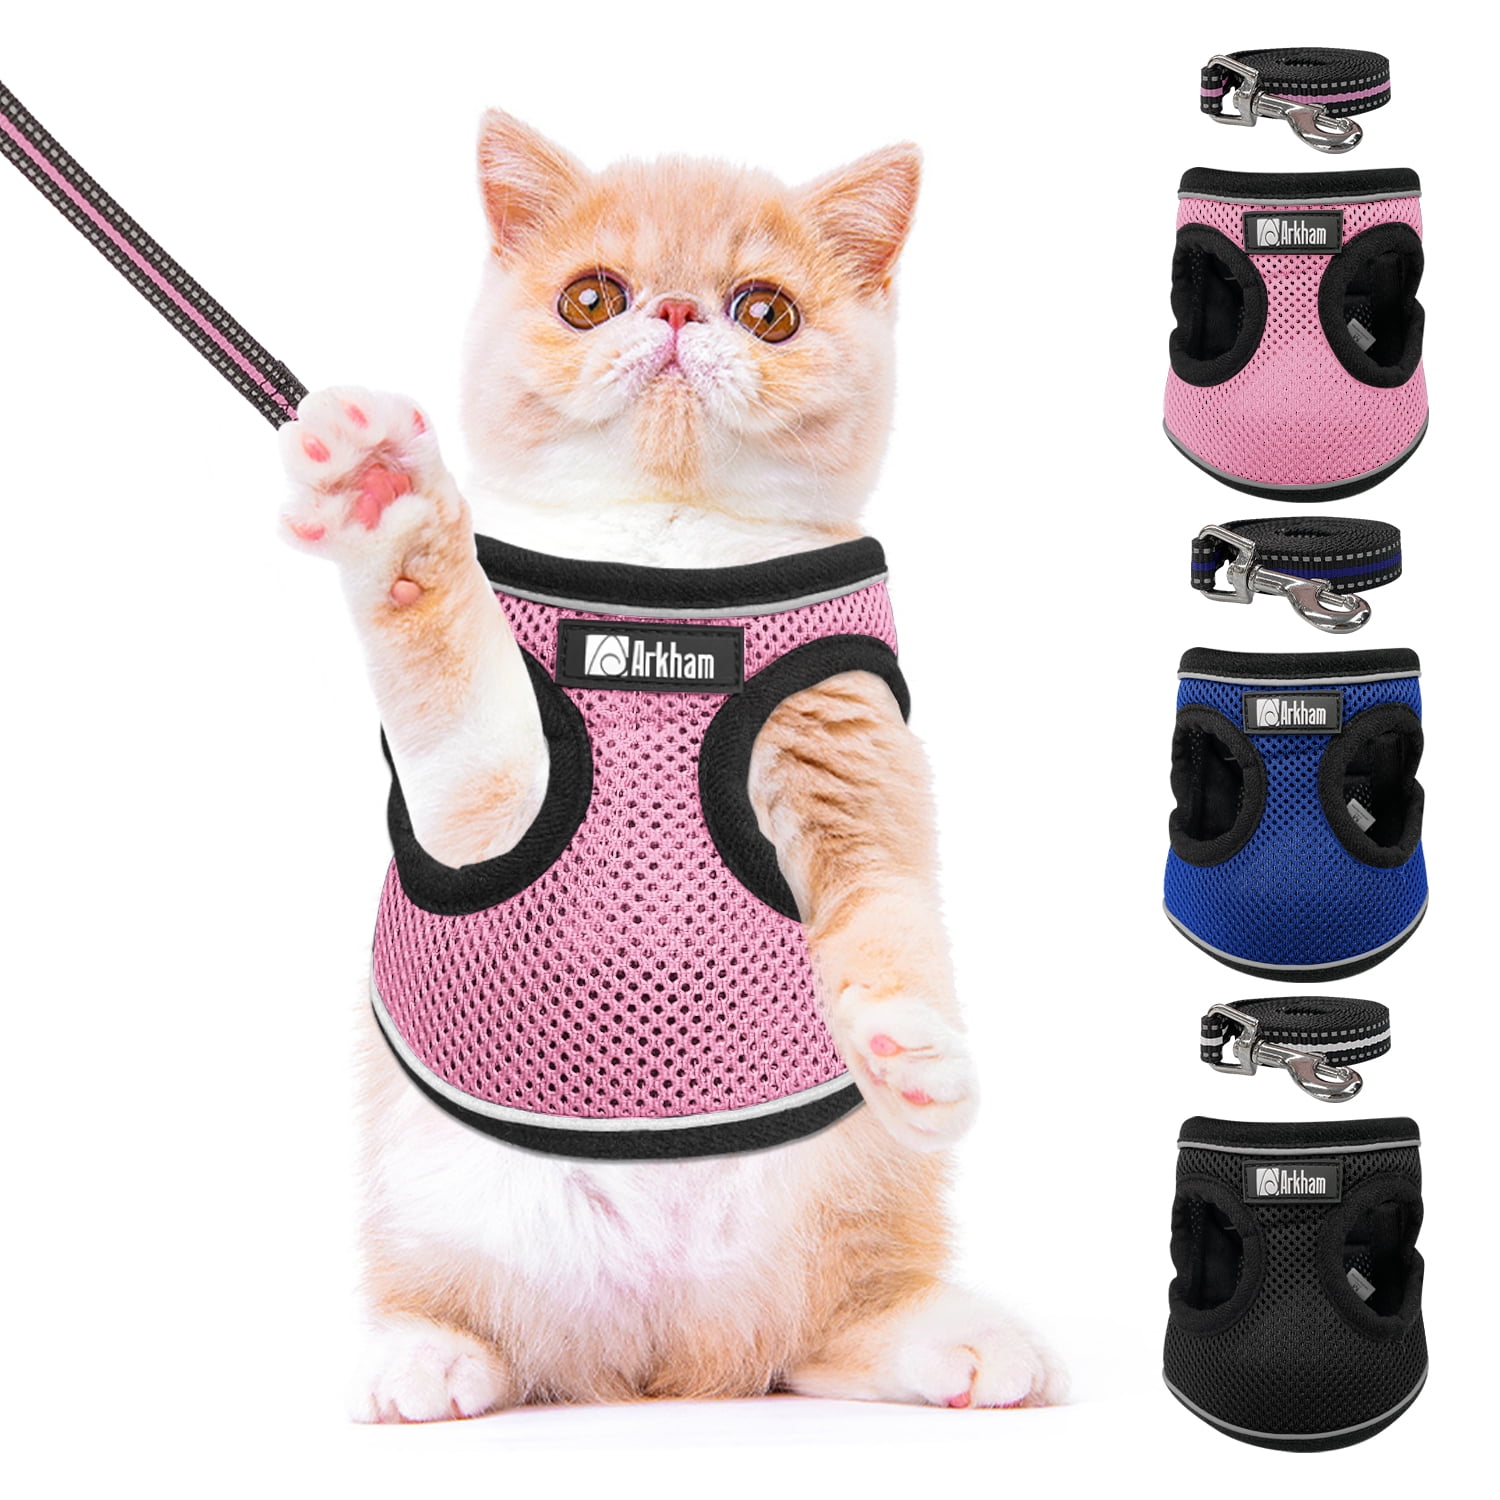 Cat Harness and Leash Escape Proof and Dog Harness Adjustable Soft Mesh Vest Harness for Walking with Reflective Strap for Pet Kitten Puppy Rabbit 